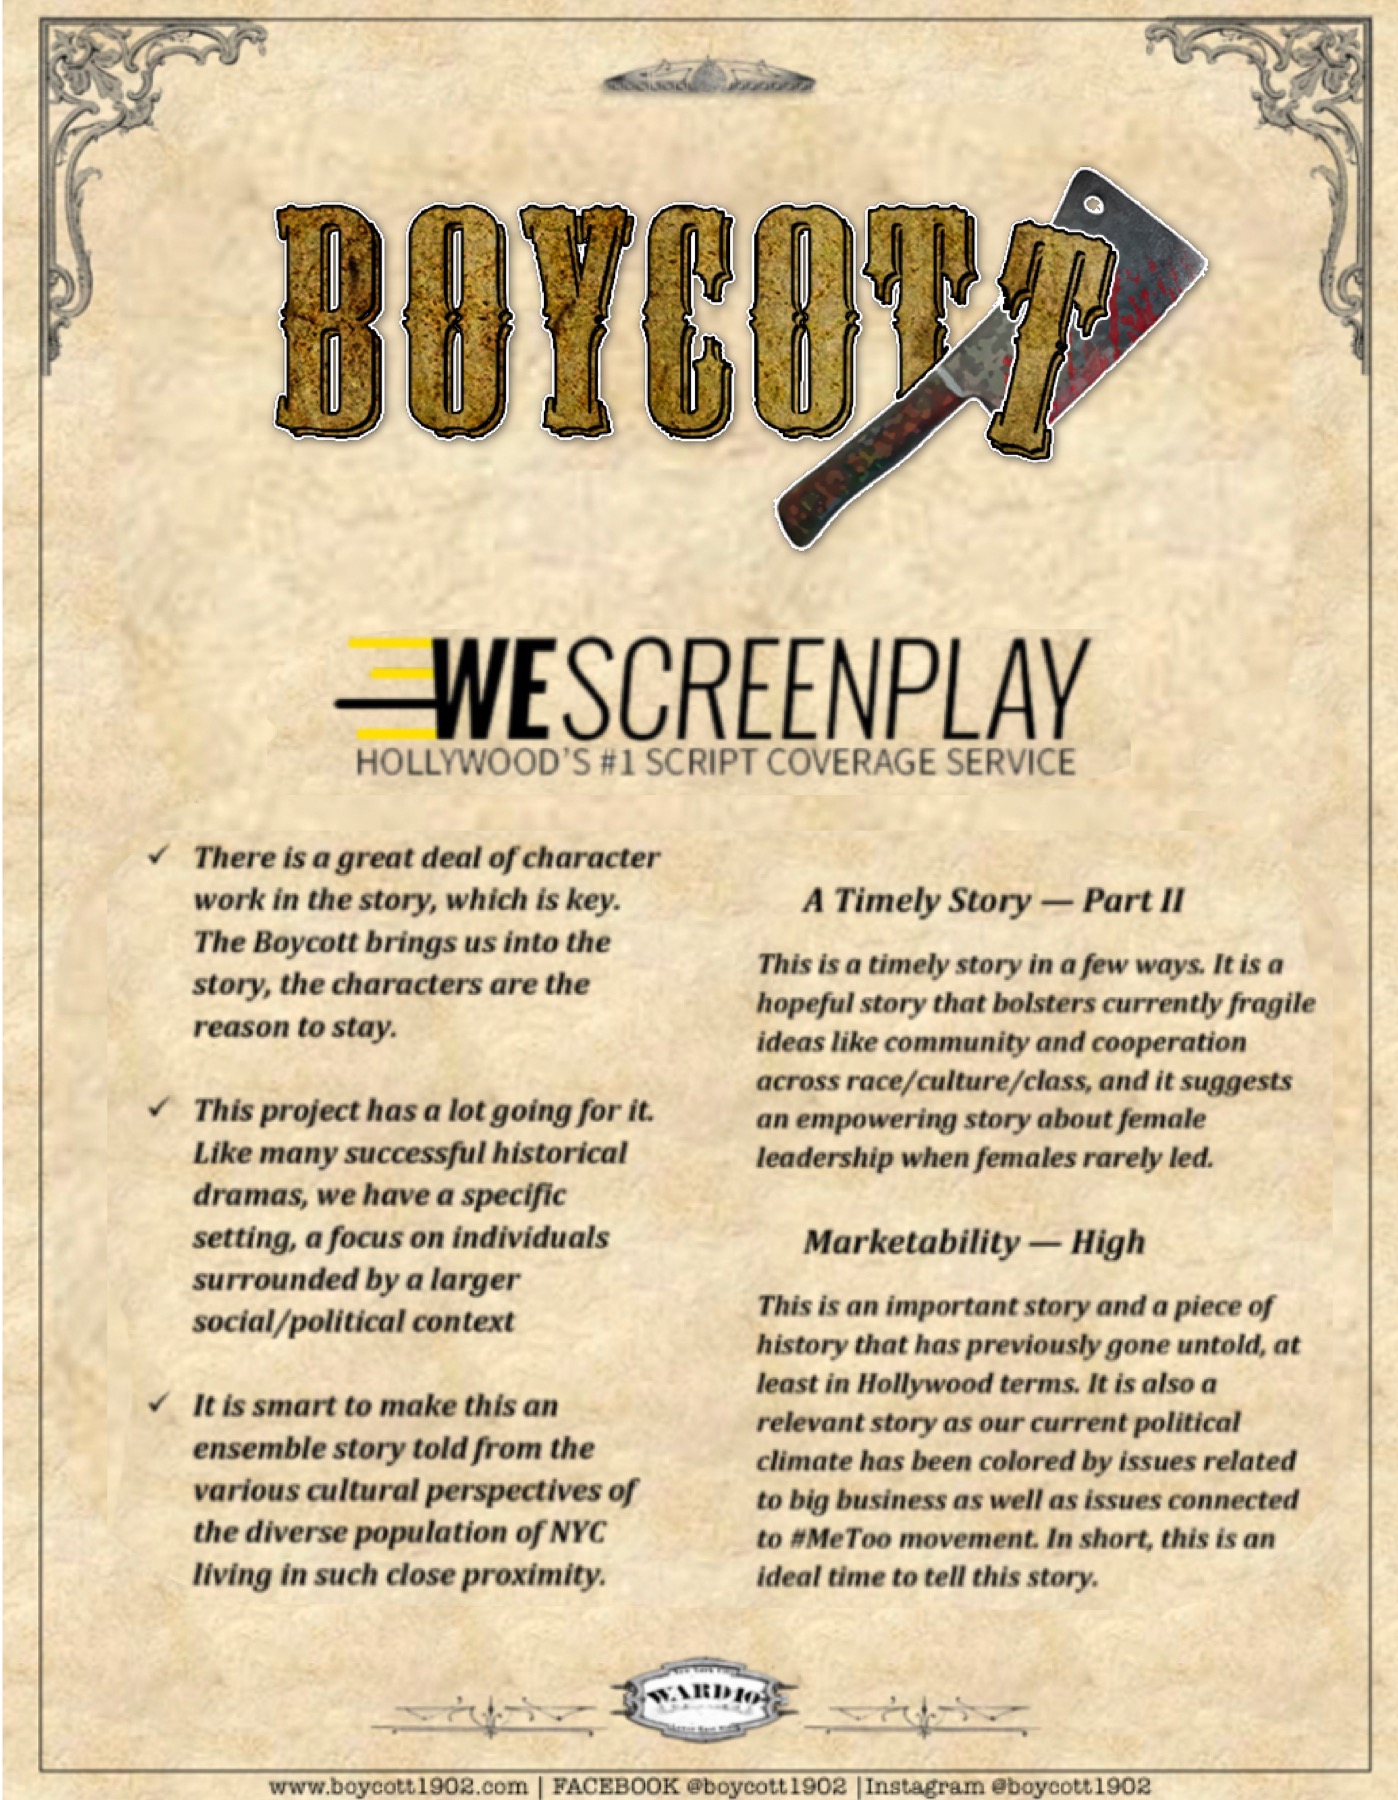 WeScreenPlay Coverage